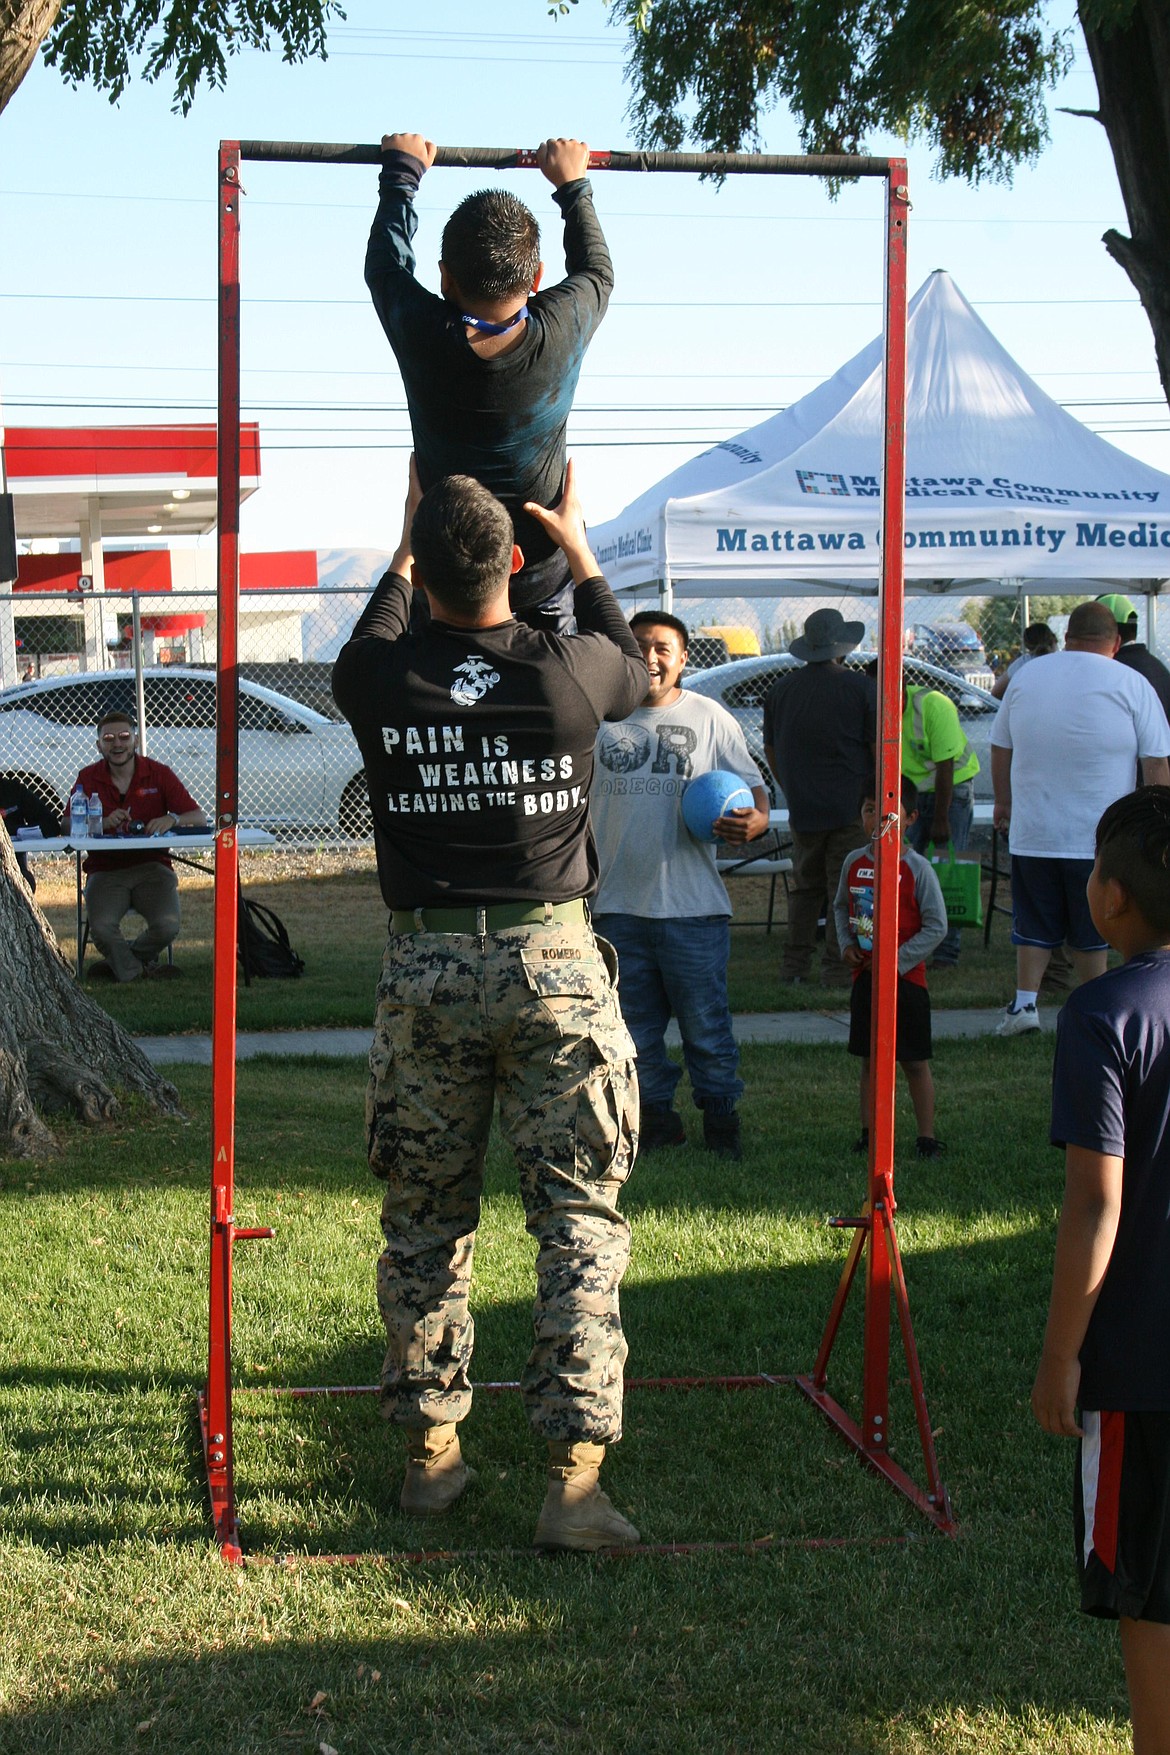 A U.S. Marine gives a hand to a child trying out the chinup bar.